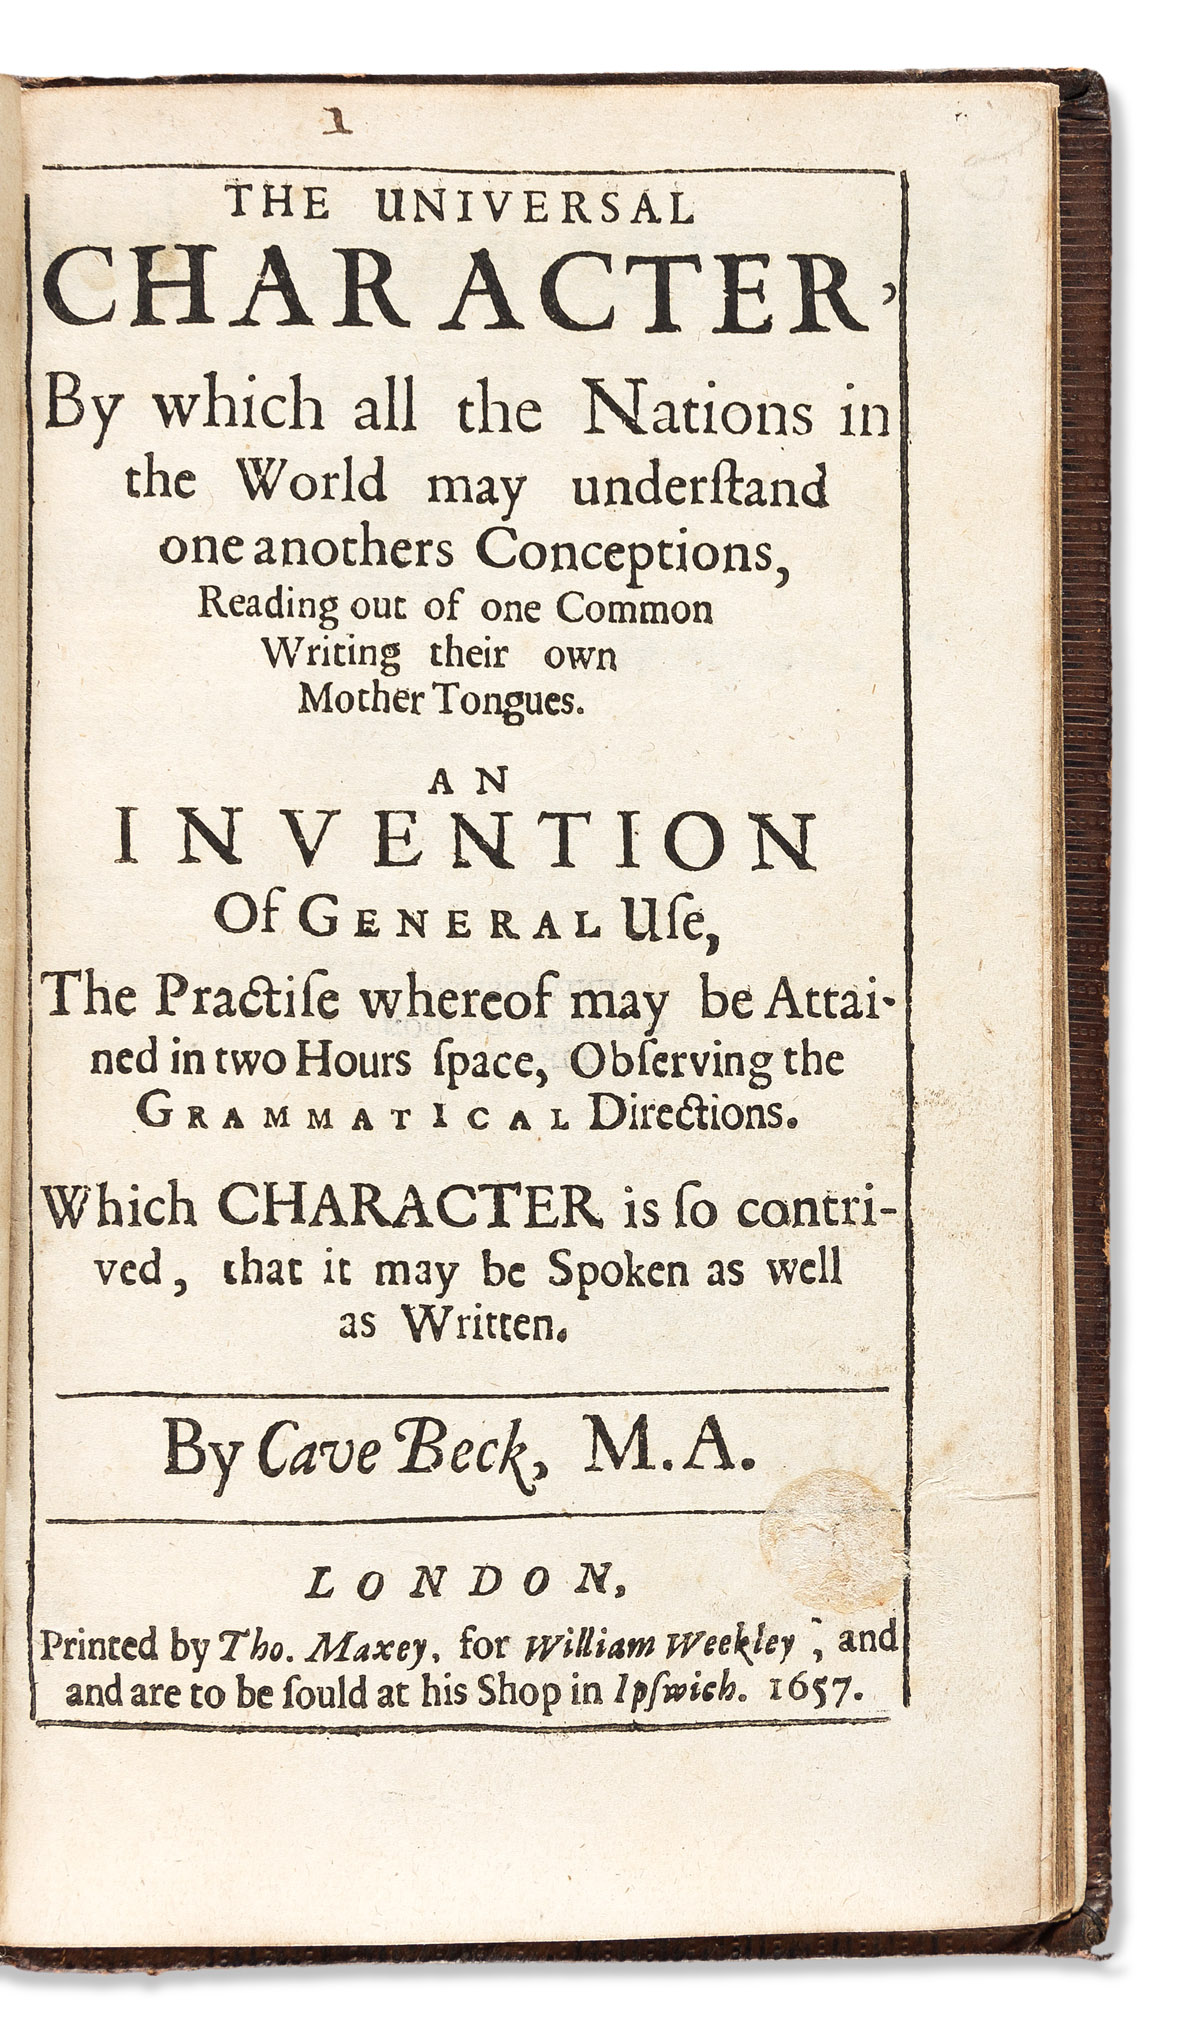 Beck, Cave (1623-1706?) The Universal Character, by which all the Nations in the World may Understand One Anothers Conceptions, Reading